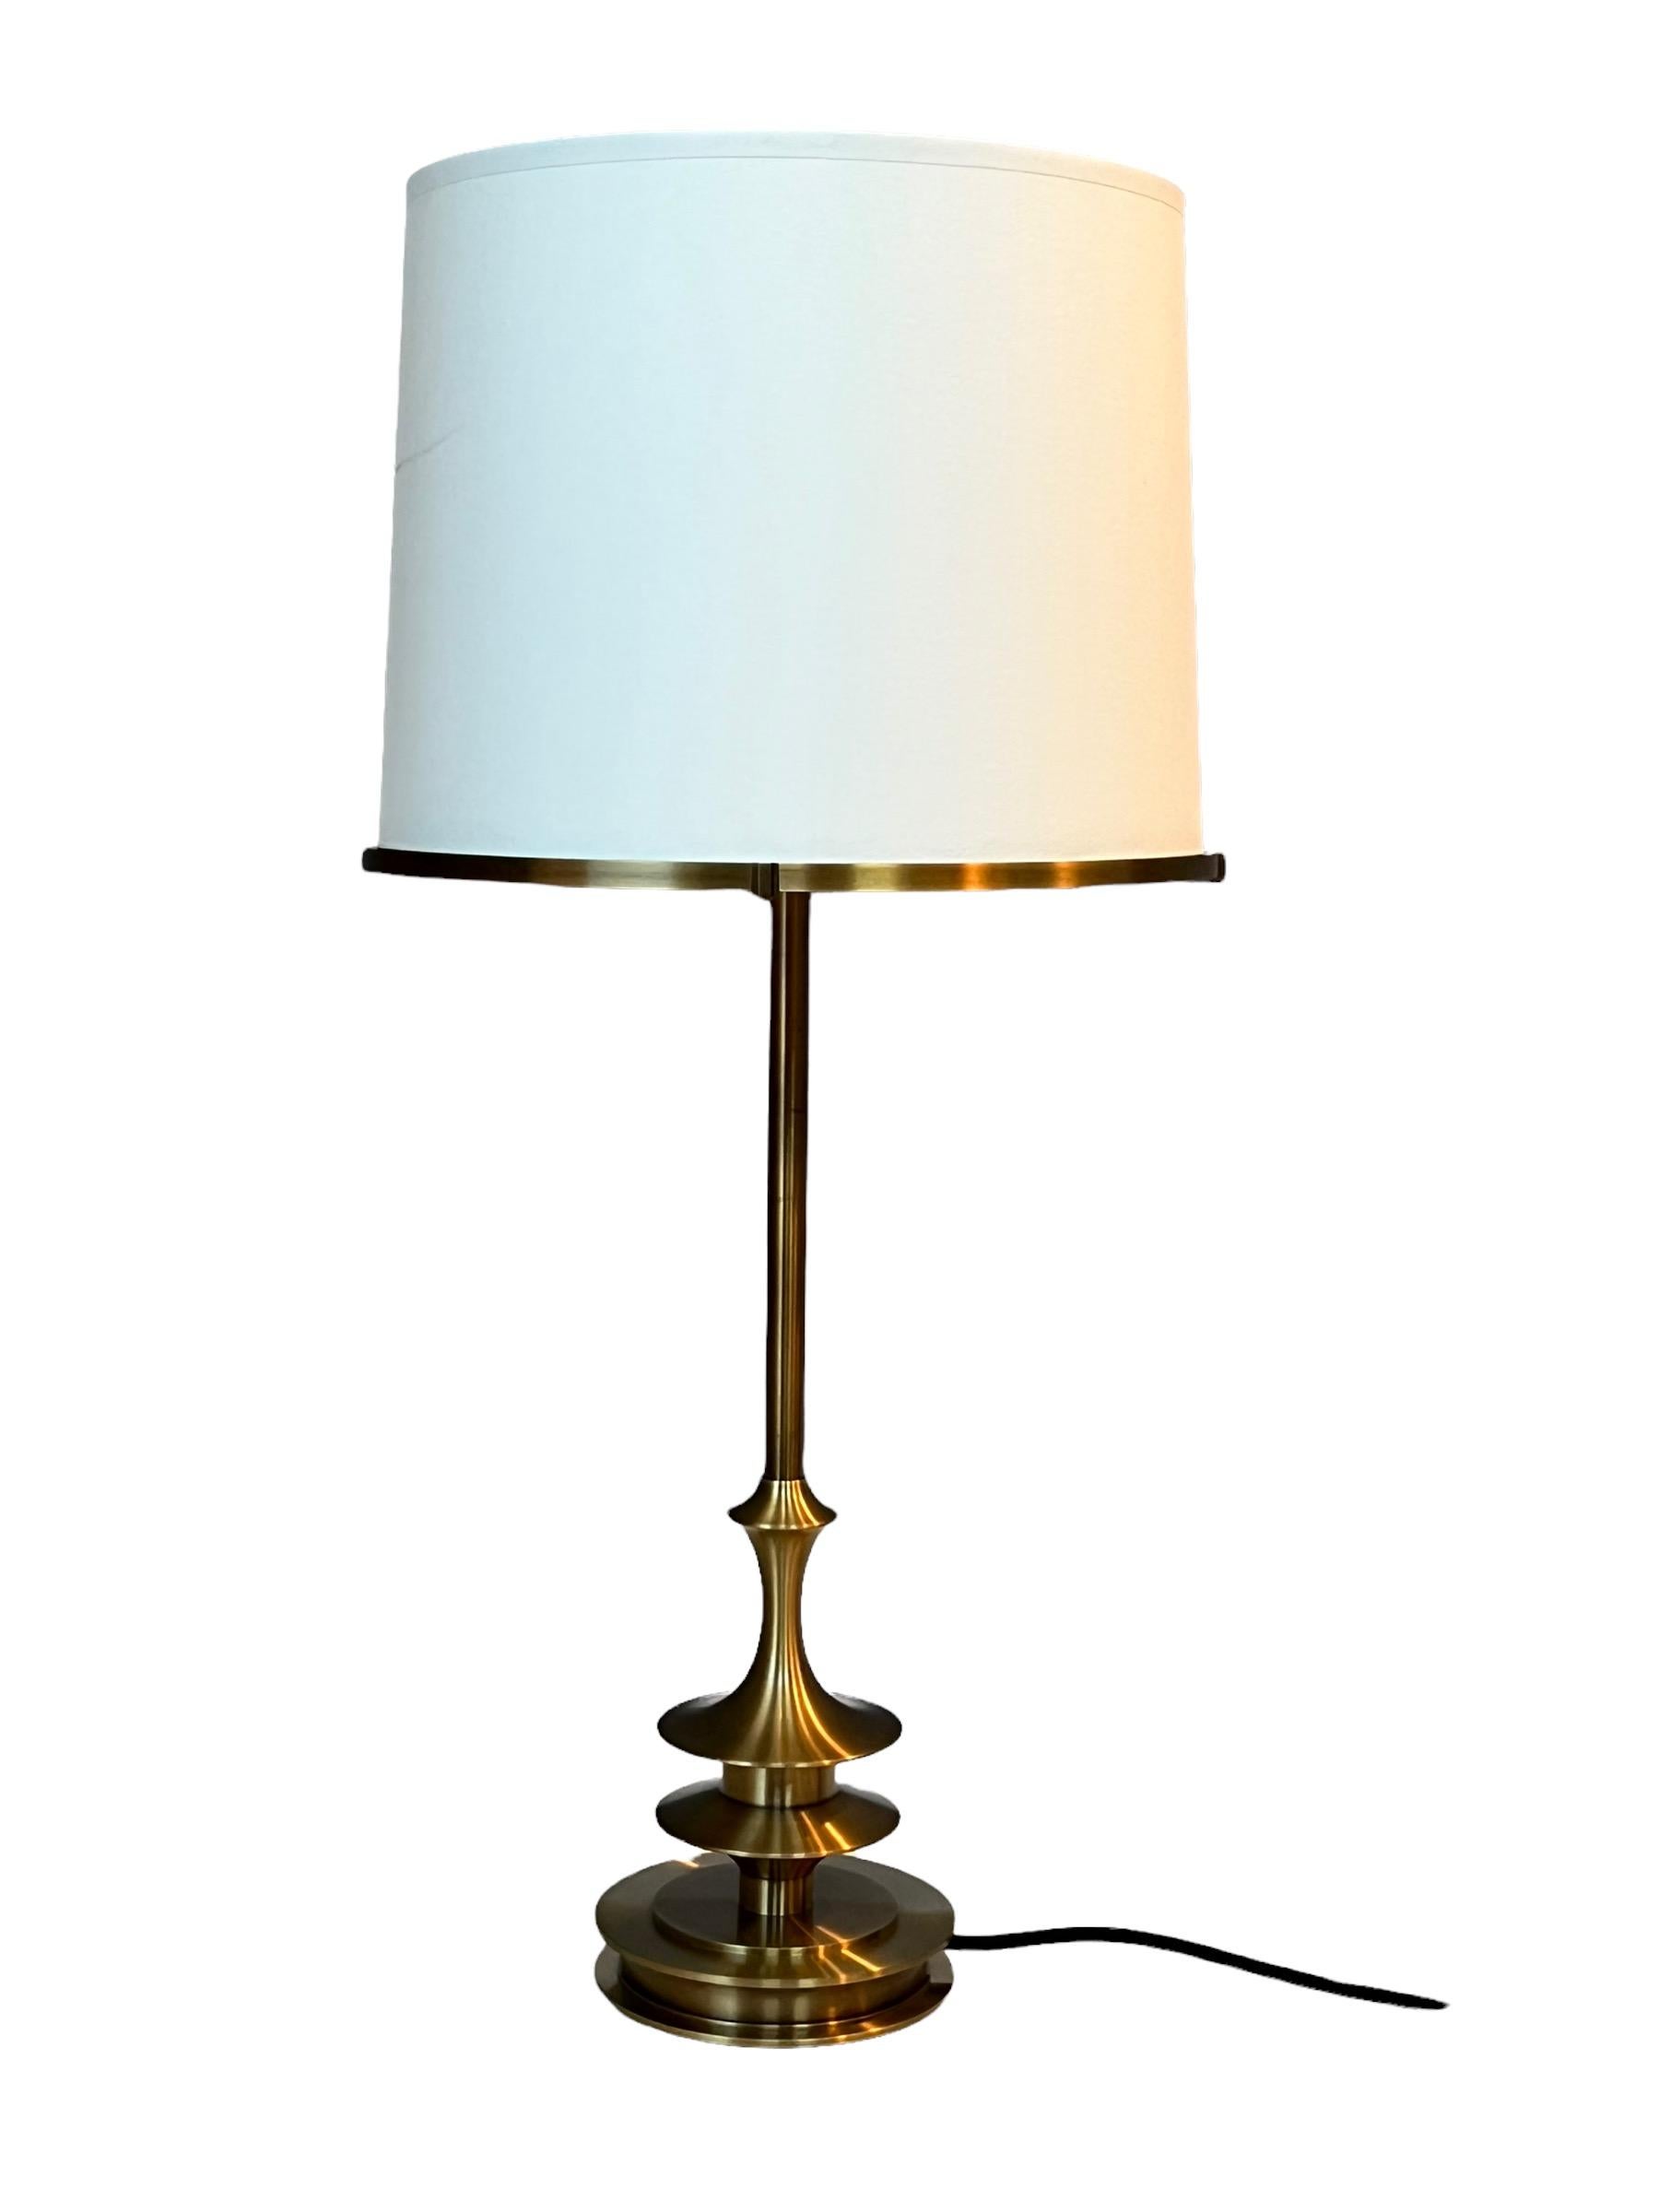 Contemporary Pair of Side Table Lamps, Solid Brass by Designer Solis Betancourt 2